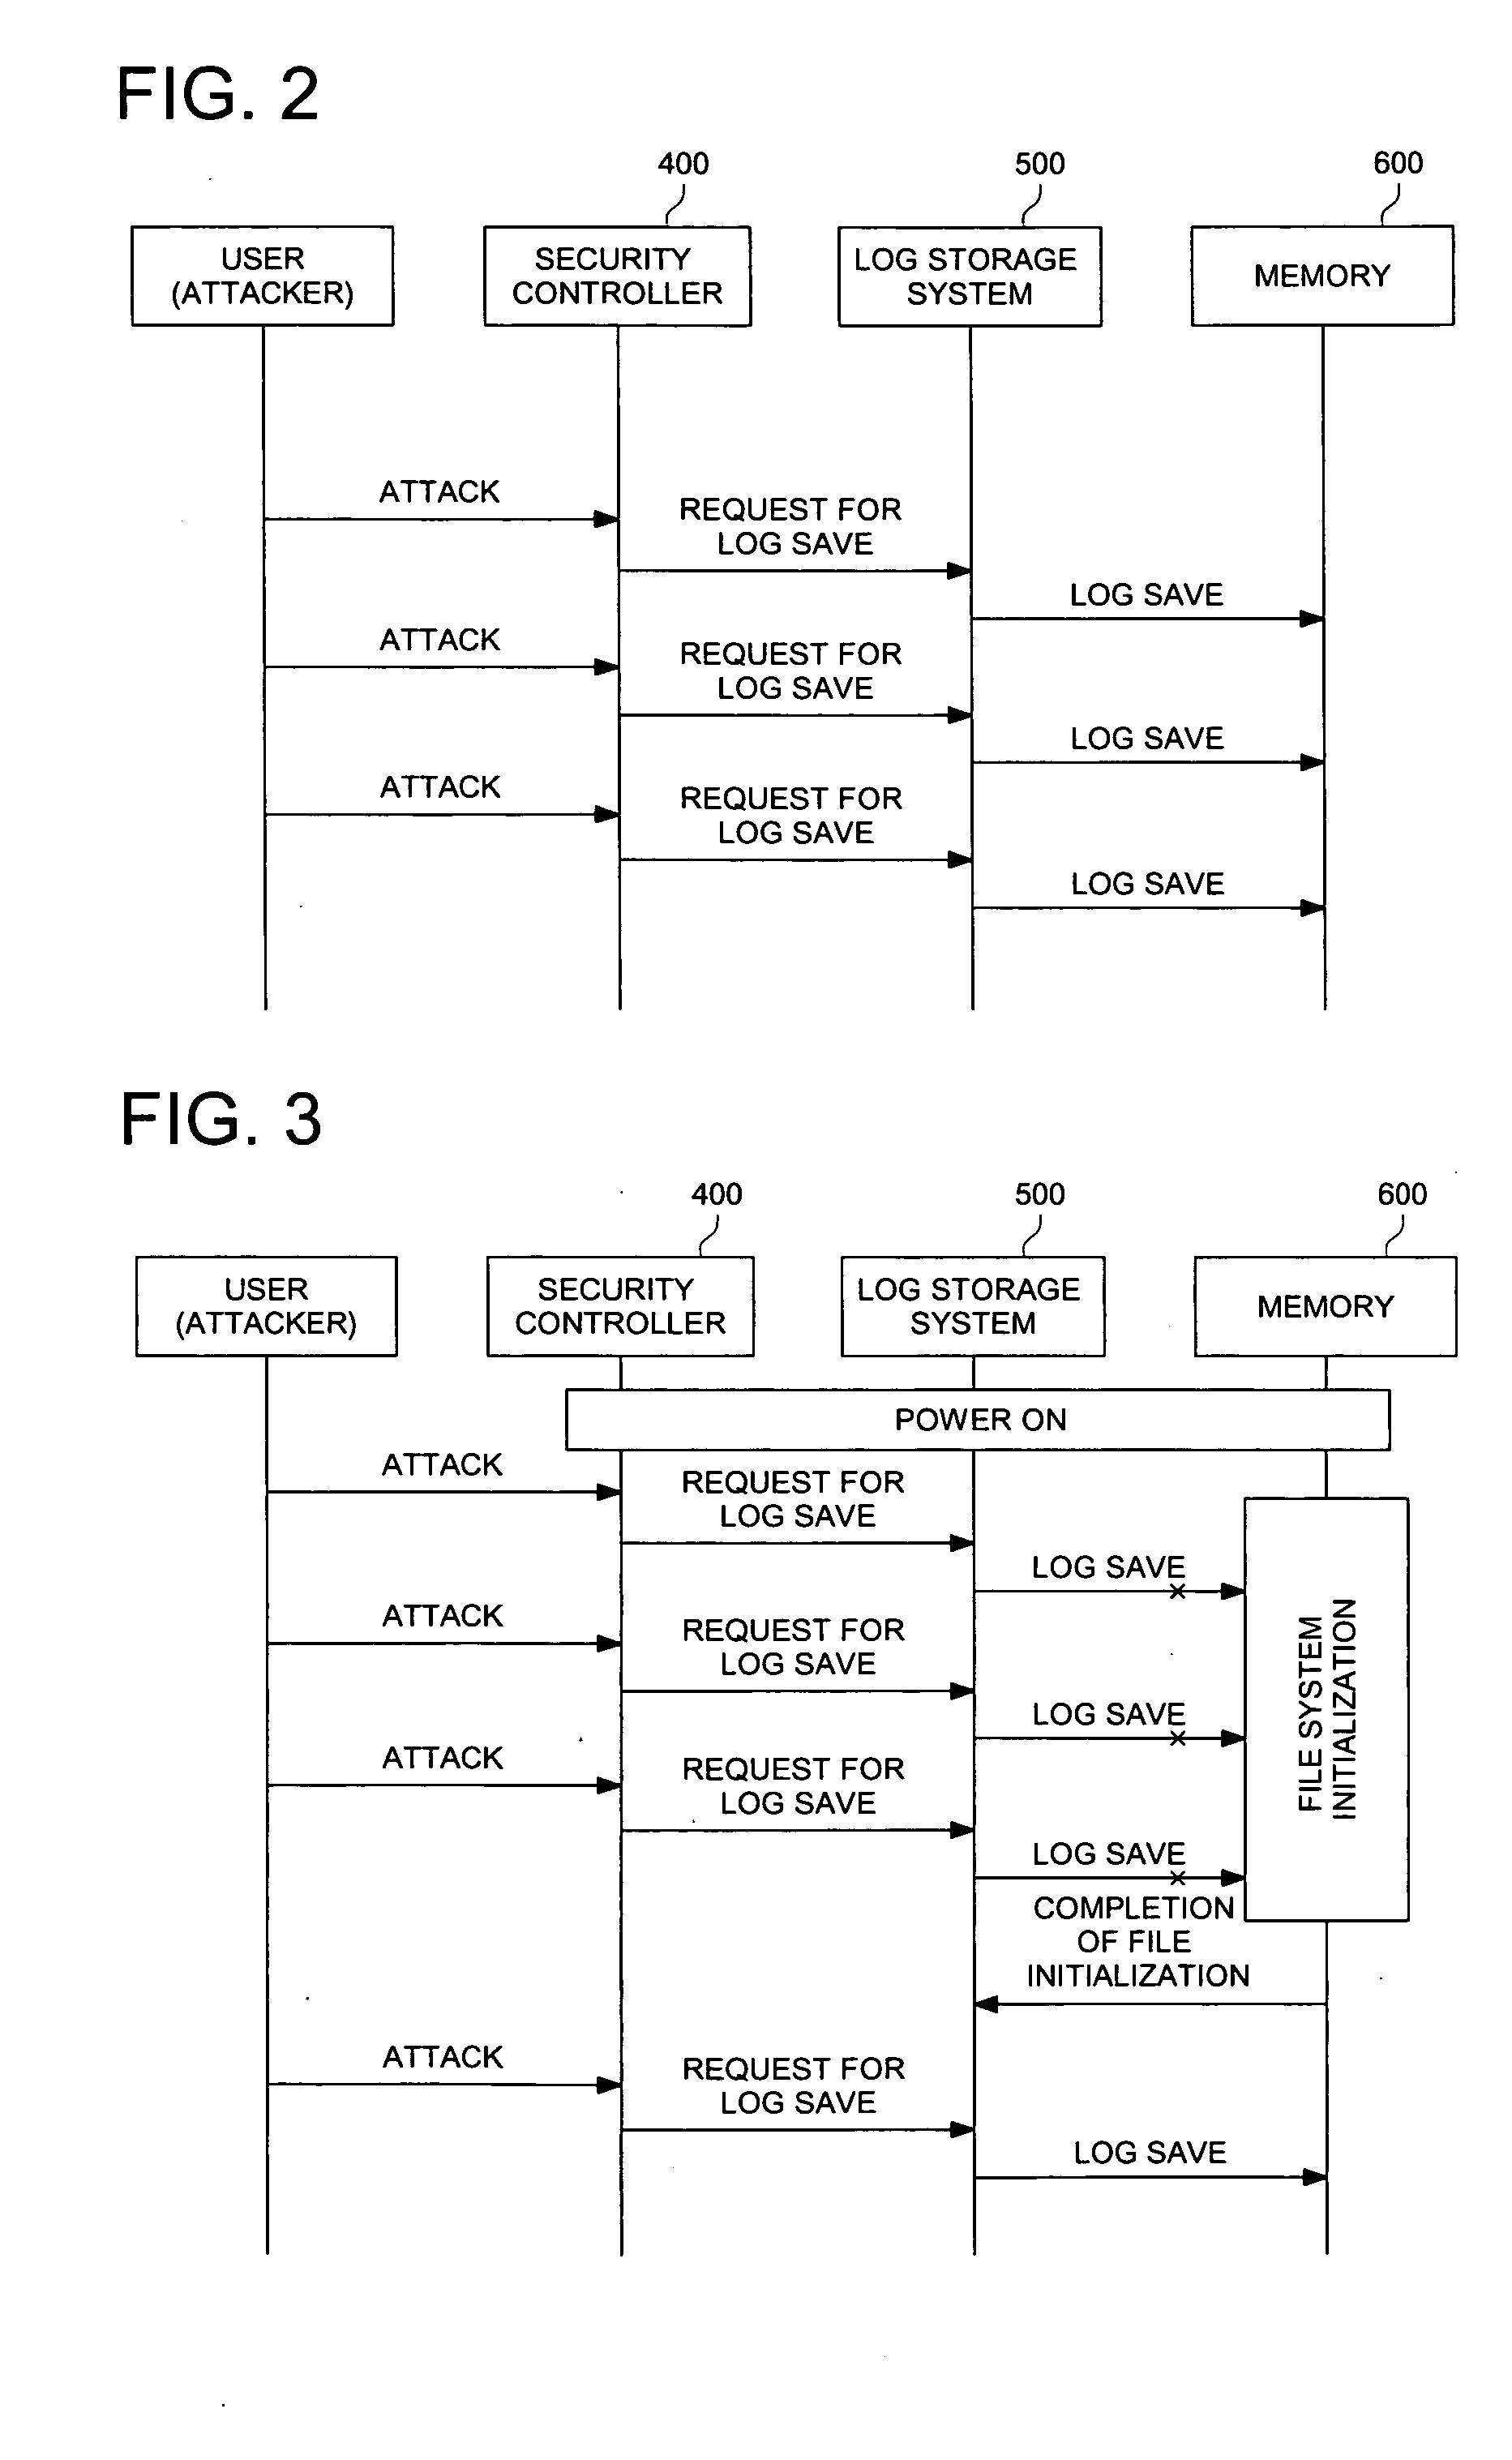 Access log storage system and digital multi-function apparatus